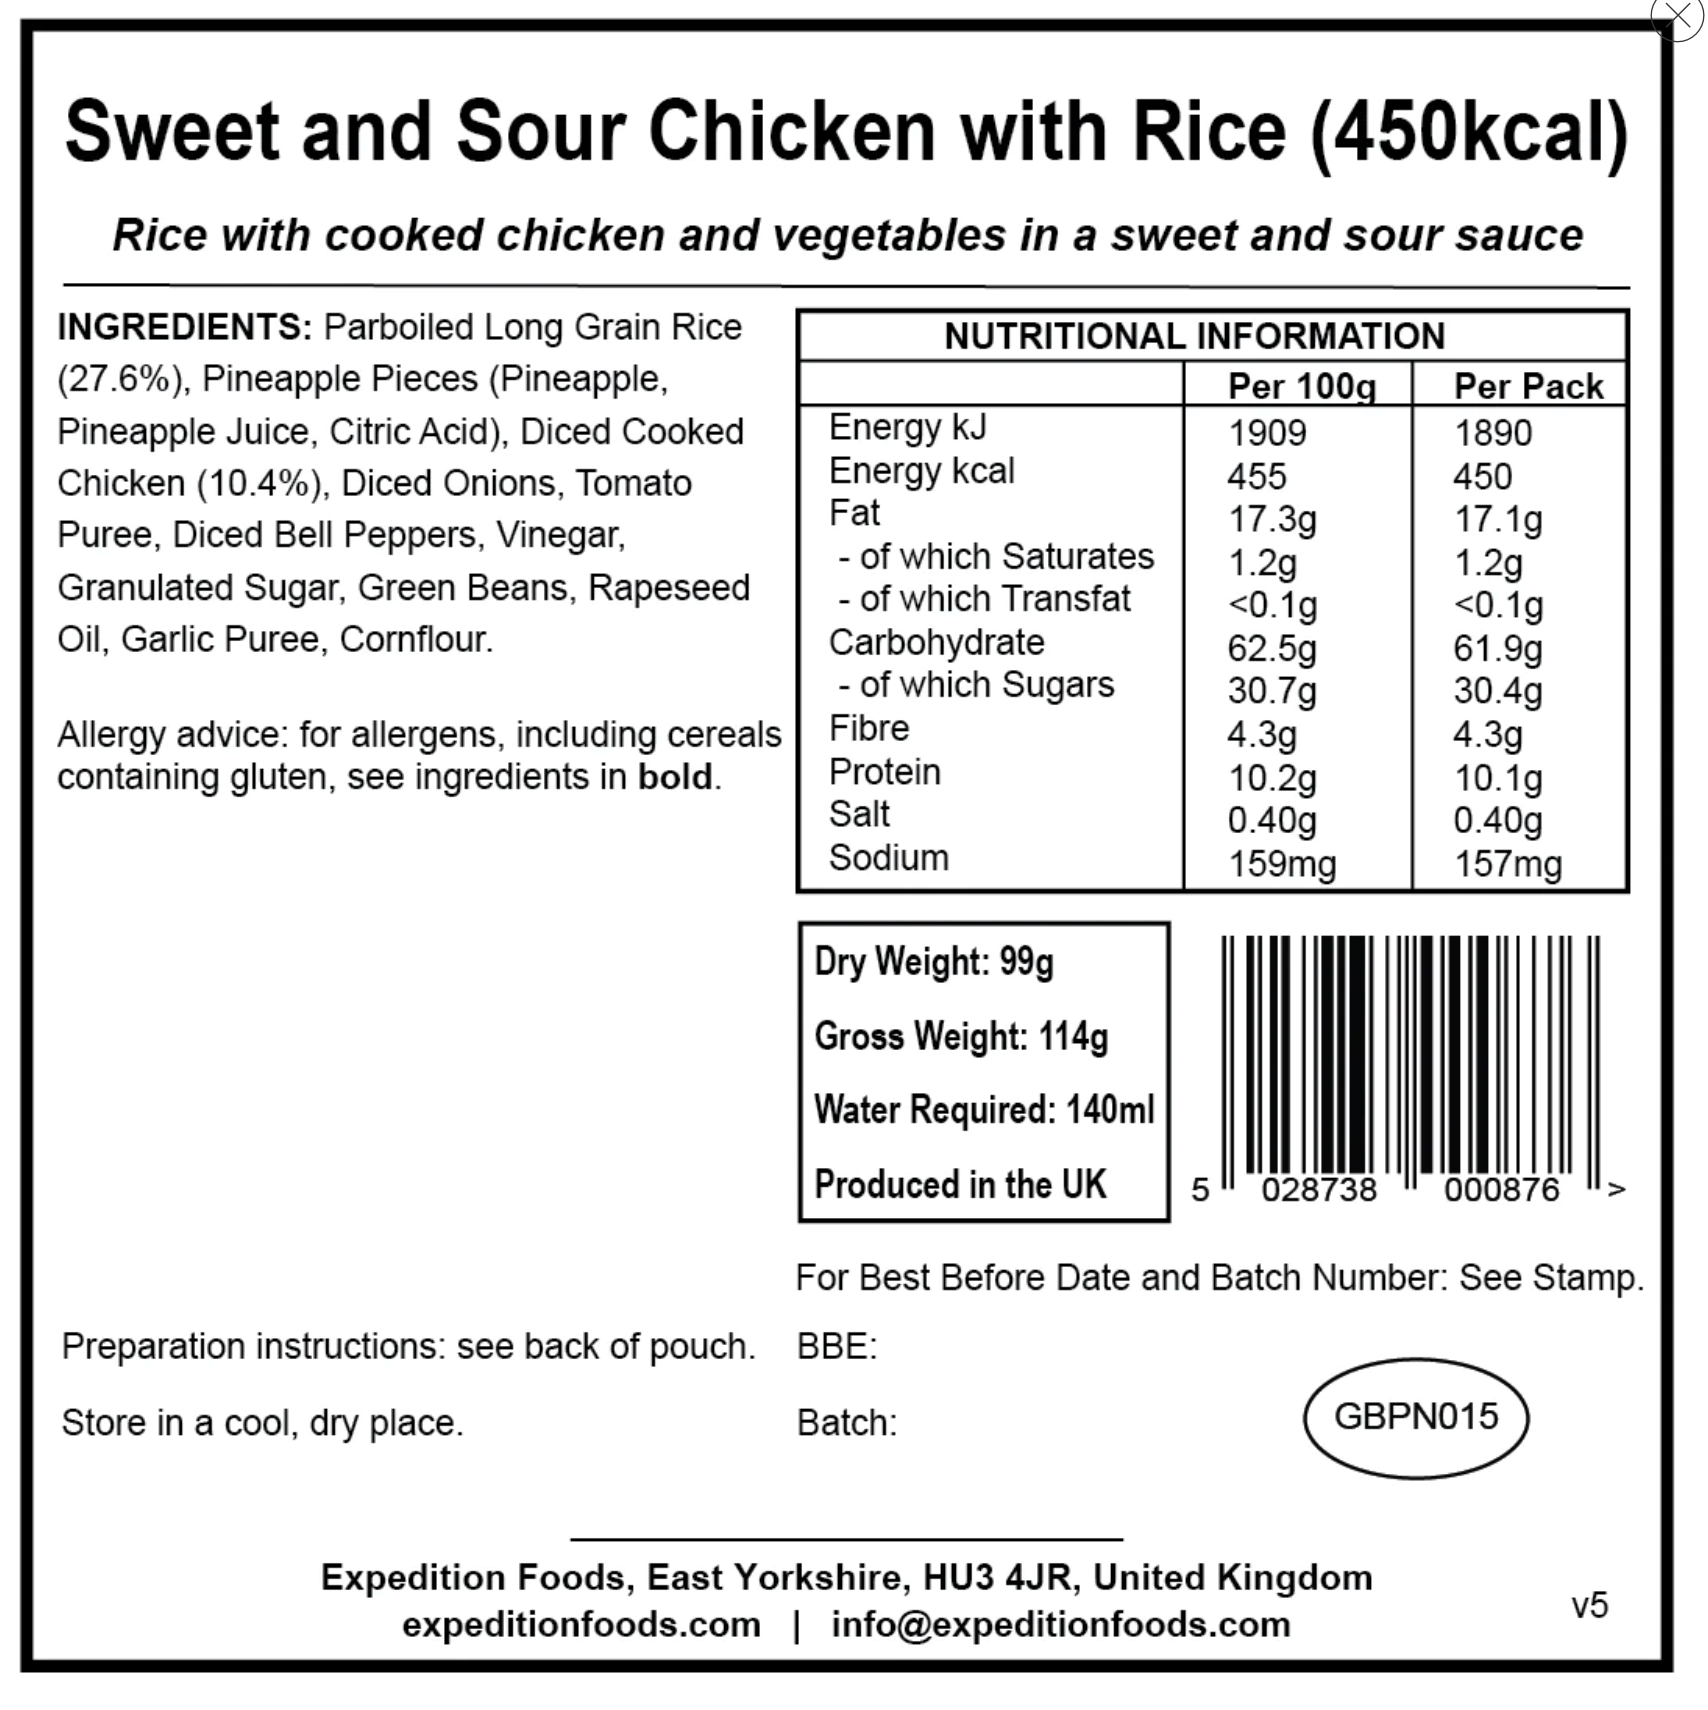 Expedition Foods Sweet and Sour Chicken with rice 450KCAL